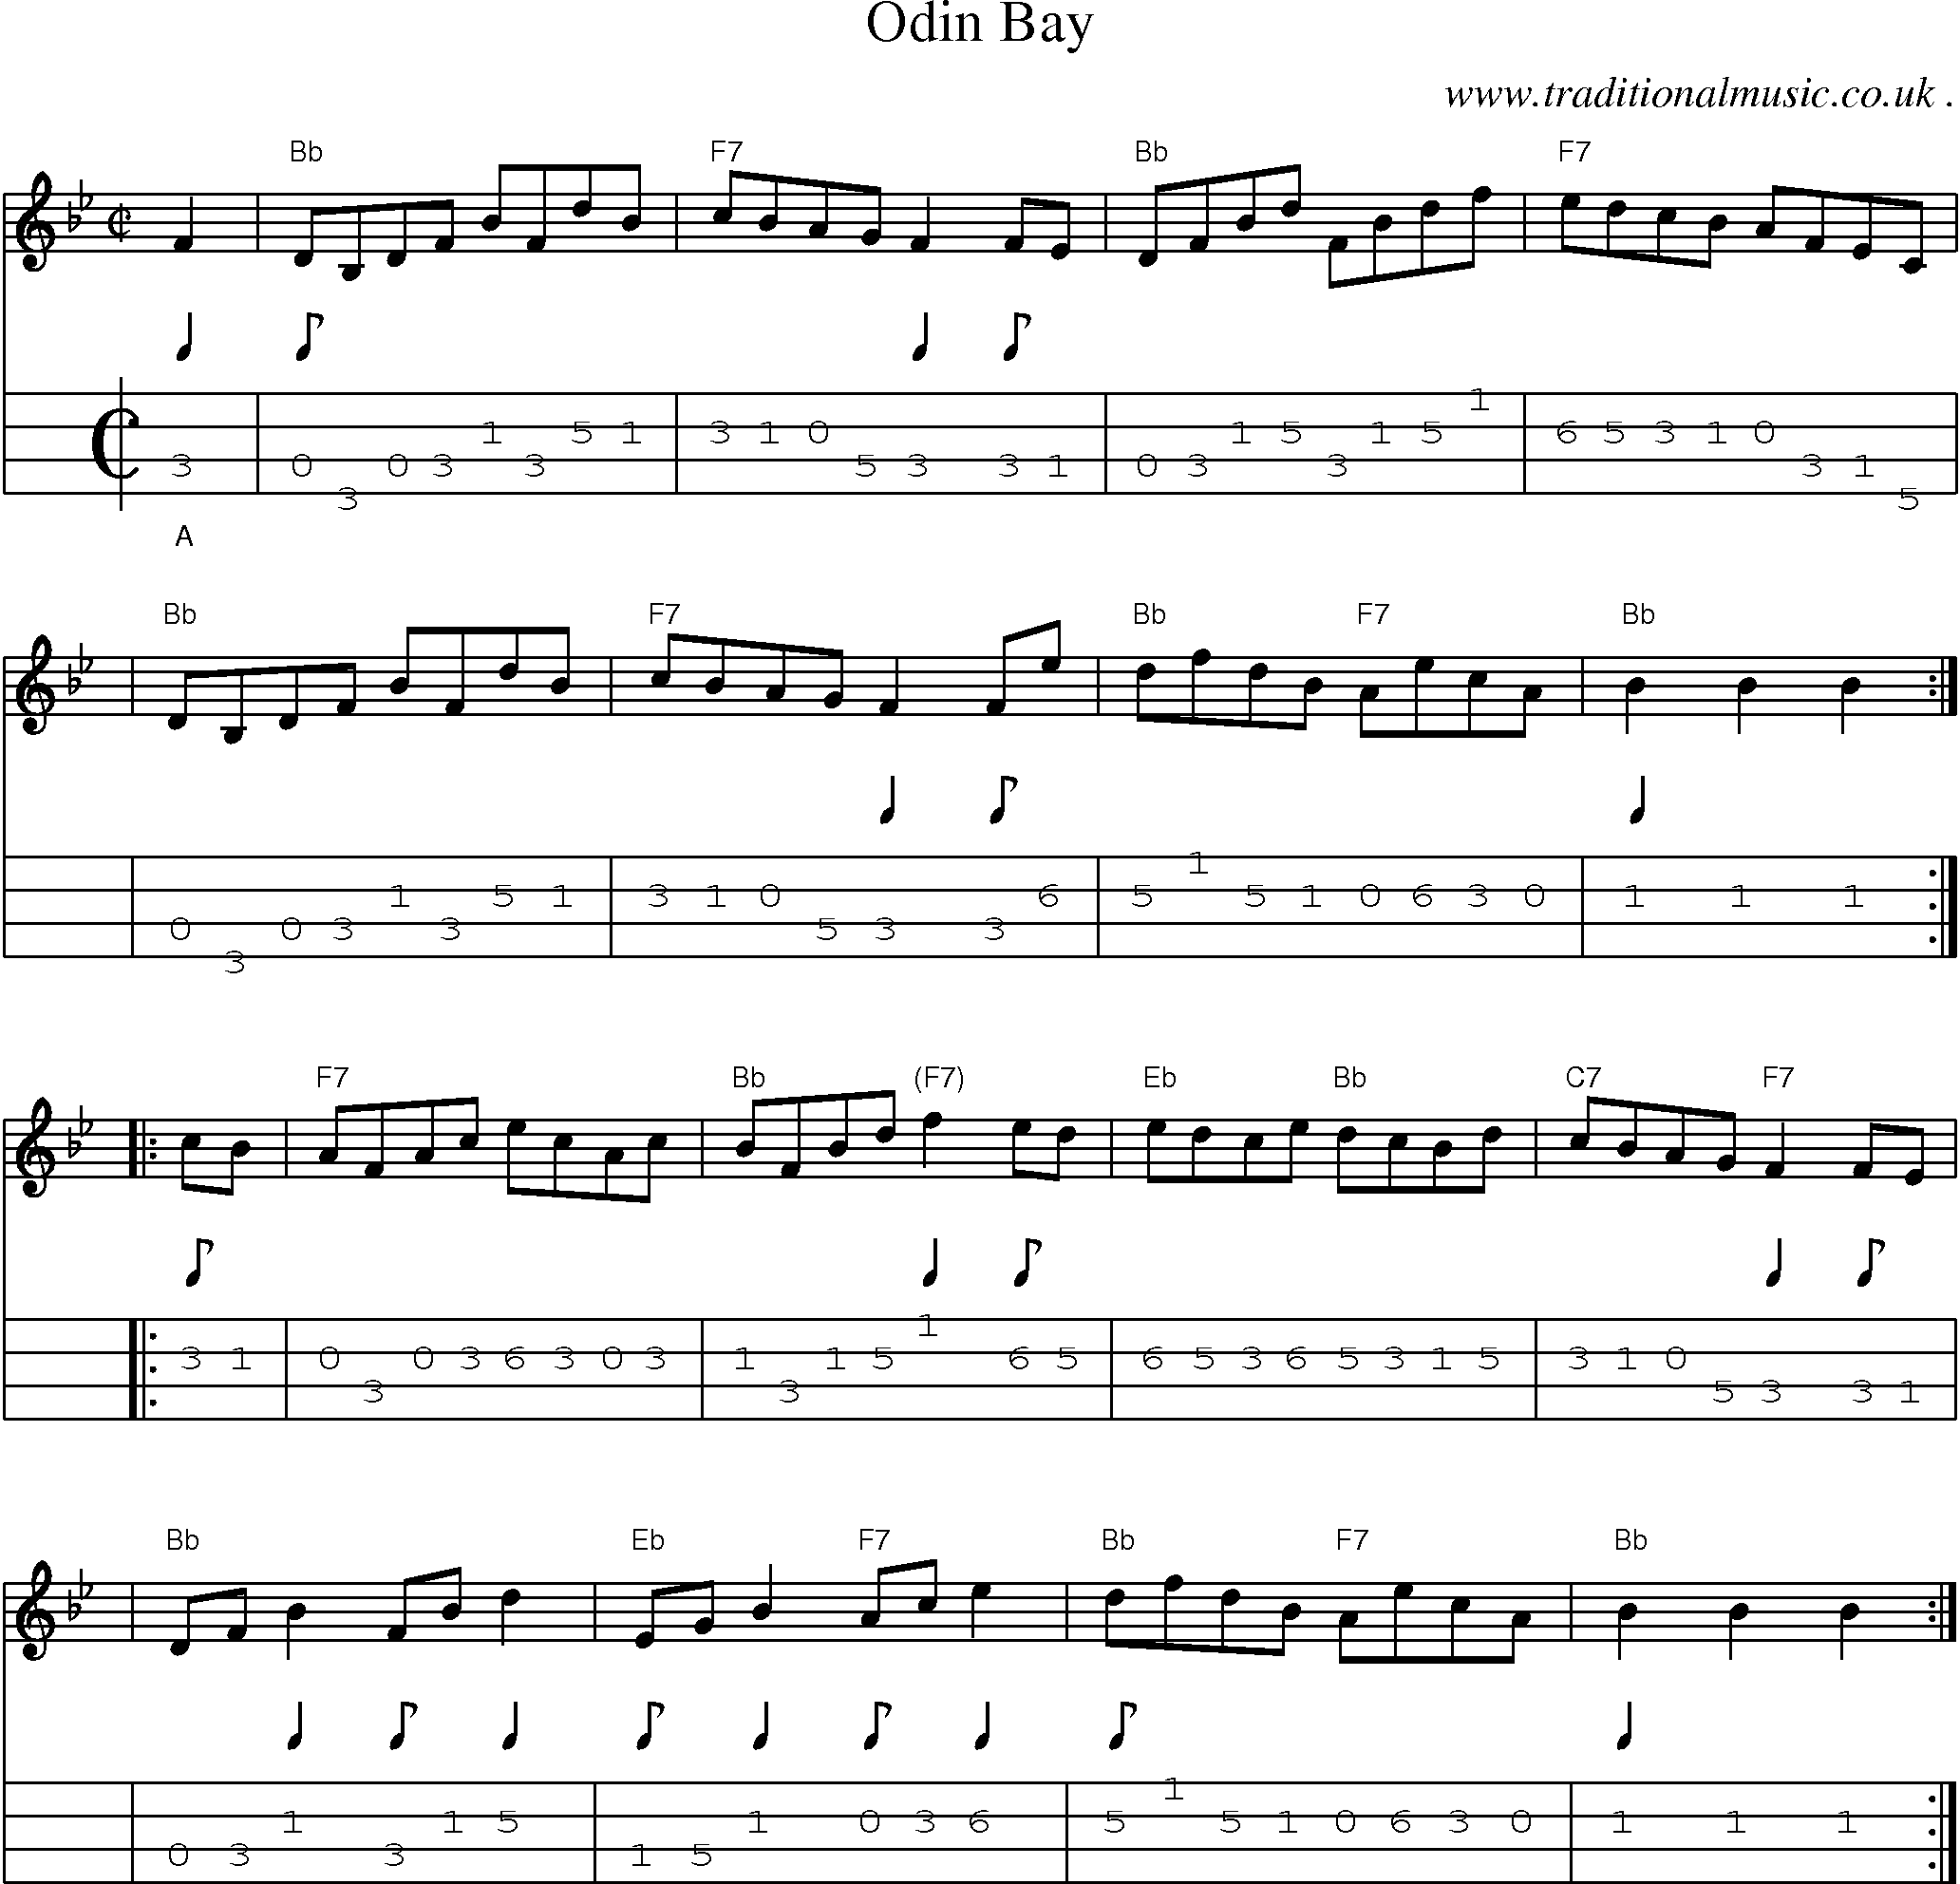 Sheet-music  score, Chords and Mandolin Tabs for Odin Bay